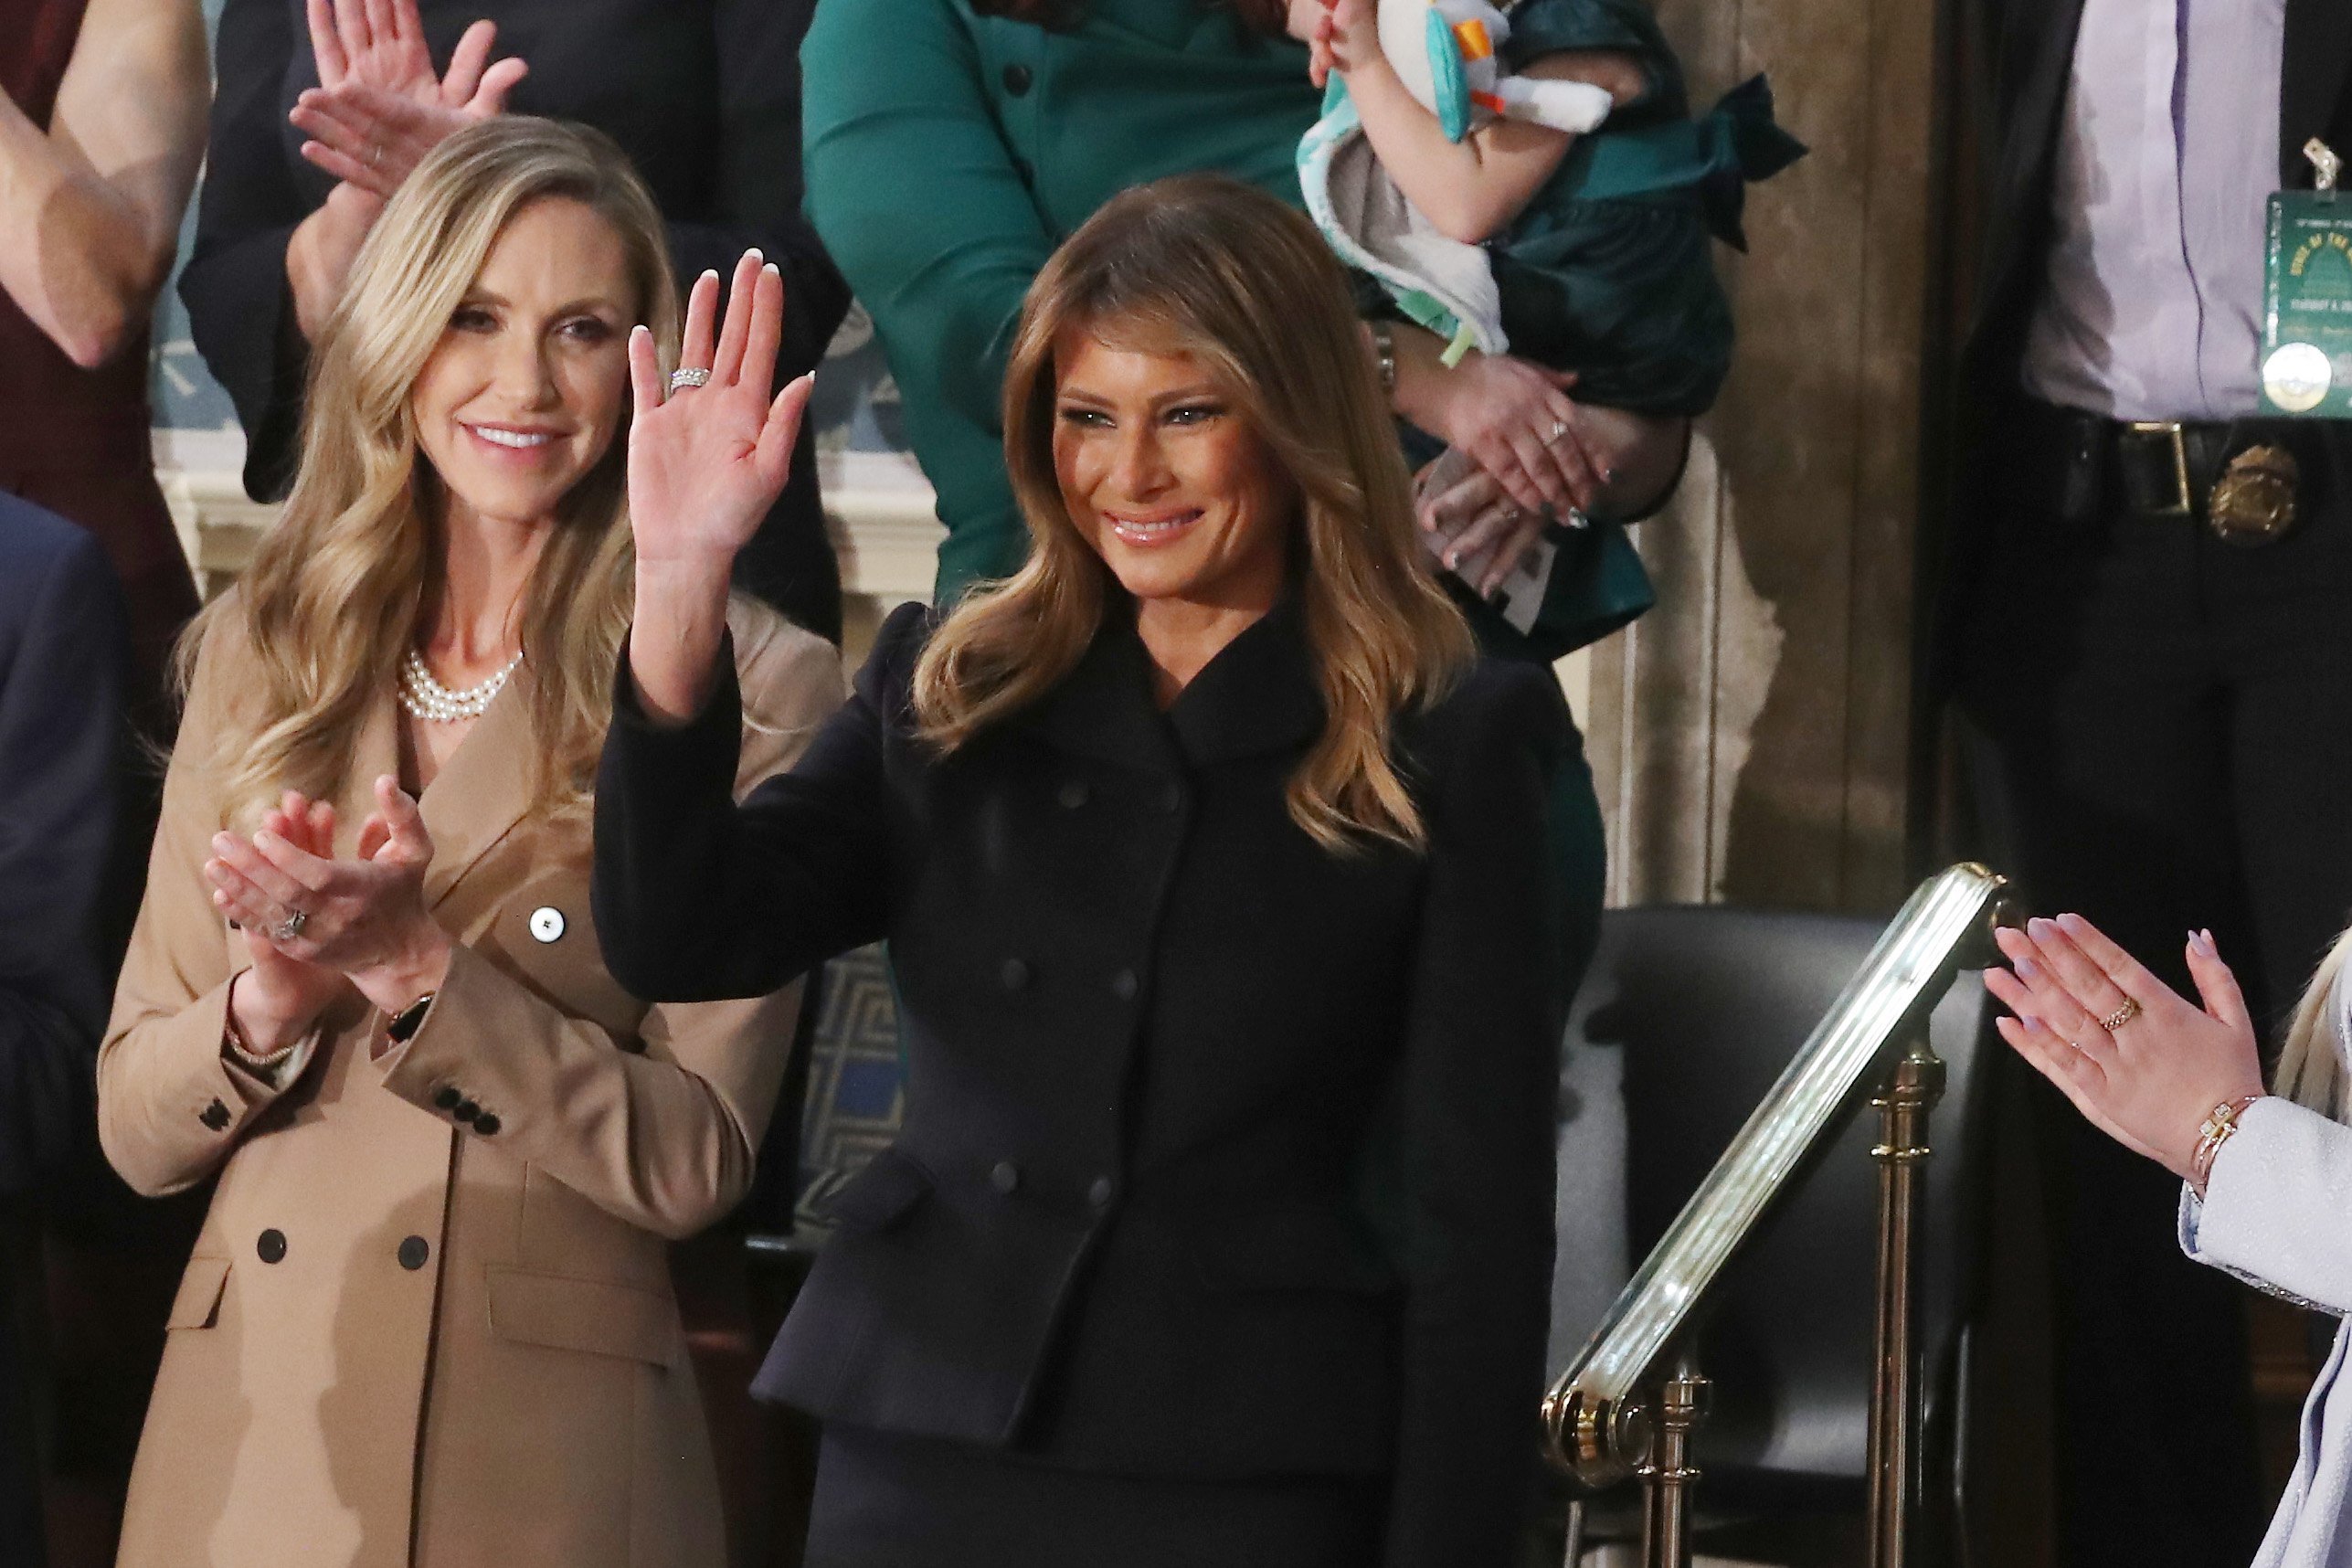  Melania Trump waves from the First Lady's box during the State of the Union address on February 04, 2020, in Washington, DC. | Source: Getty Images.